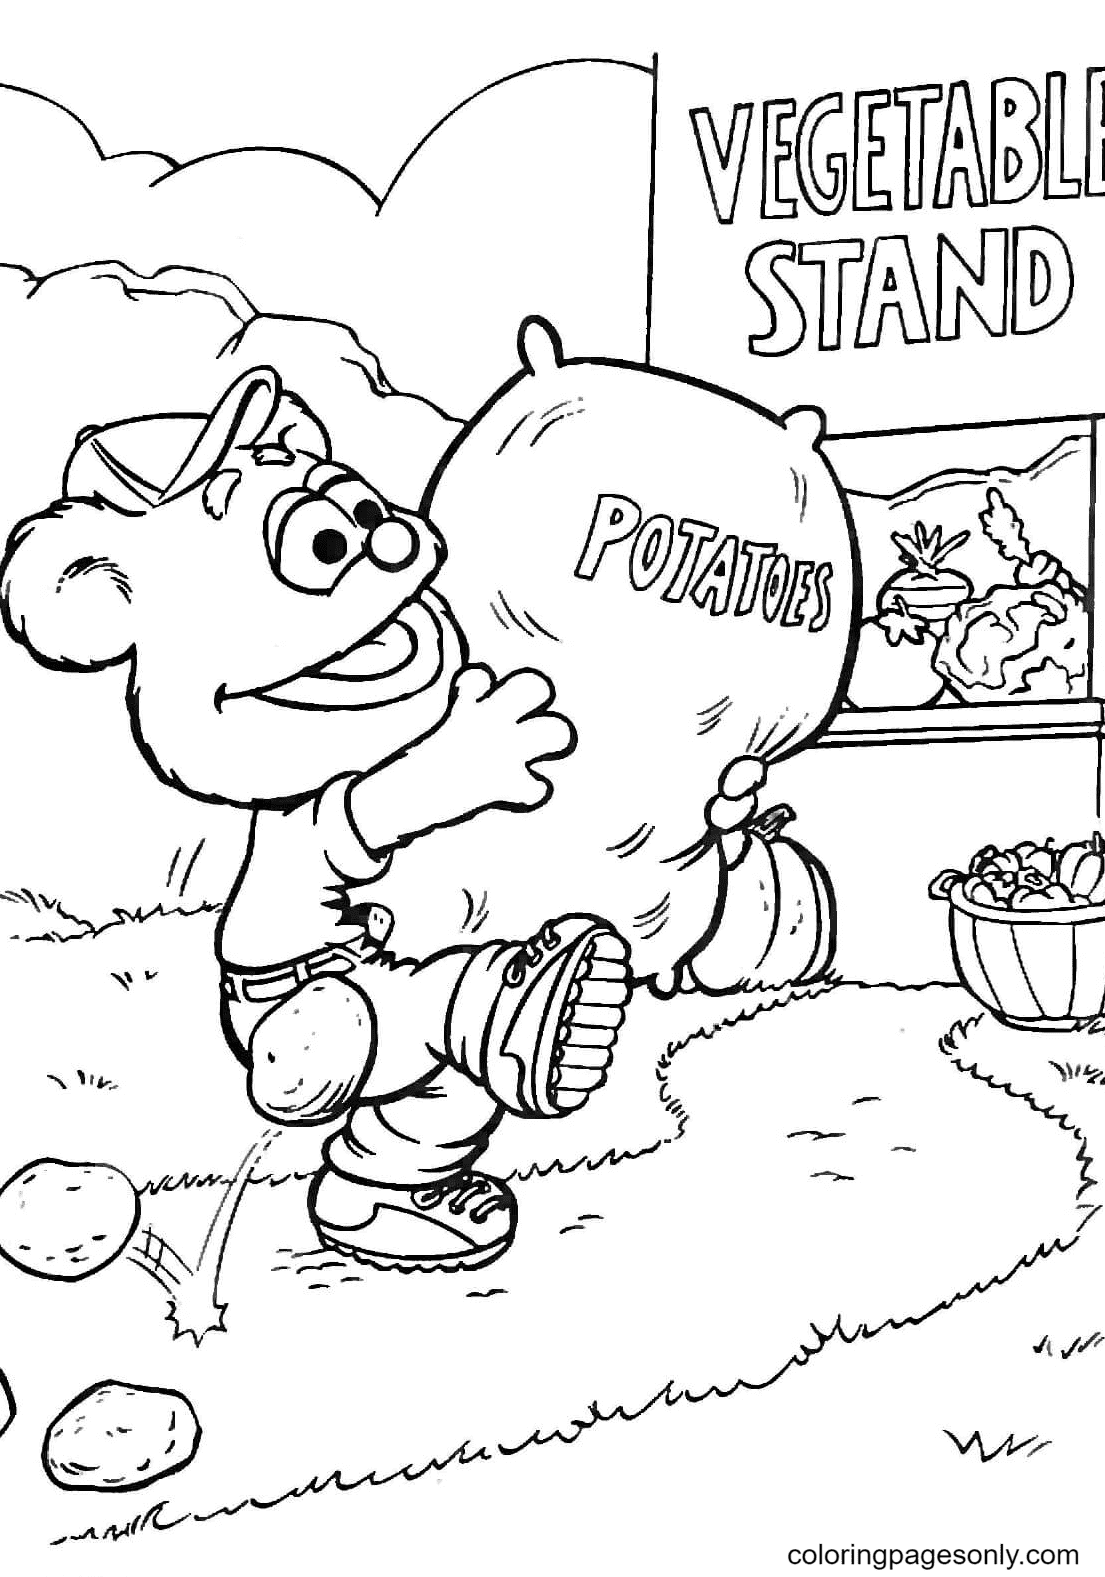 Fozzie brings a sack of potatoes Coloring Page